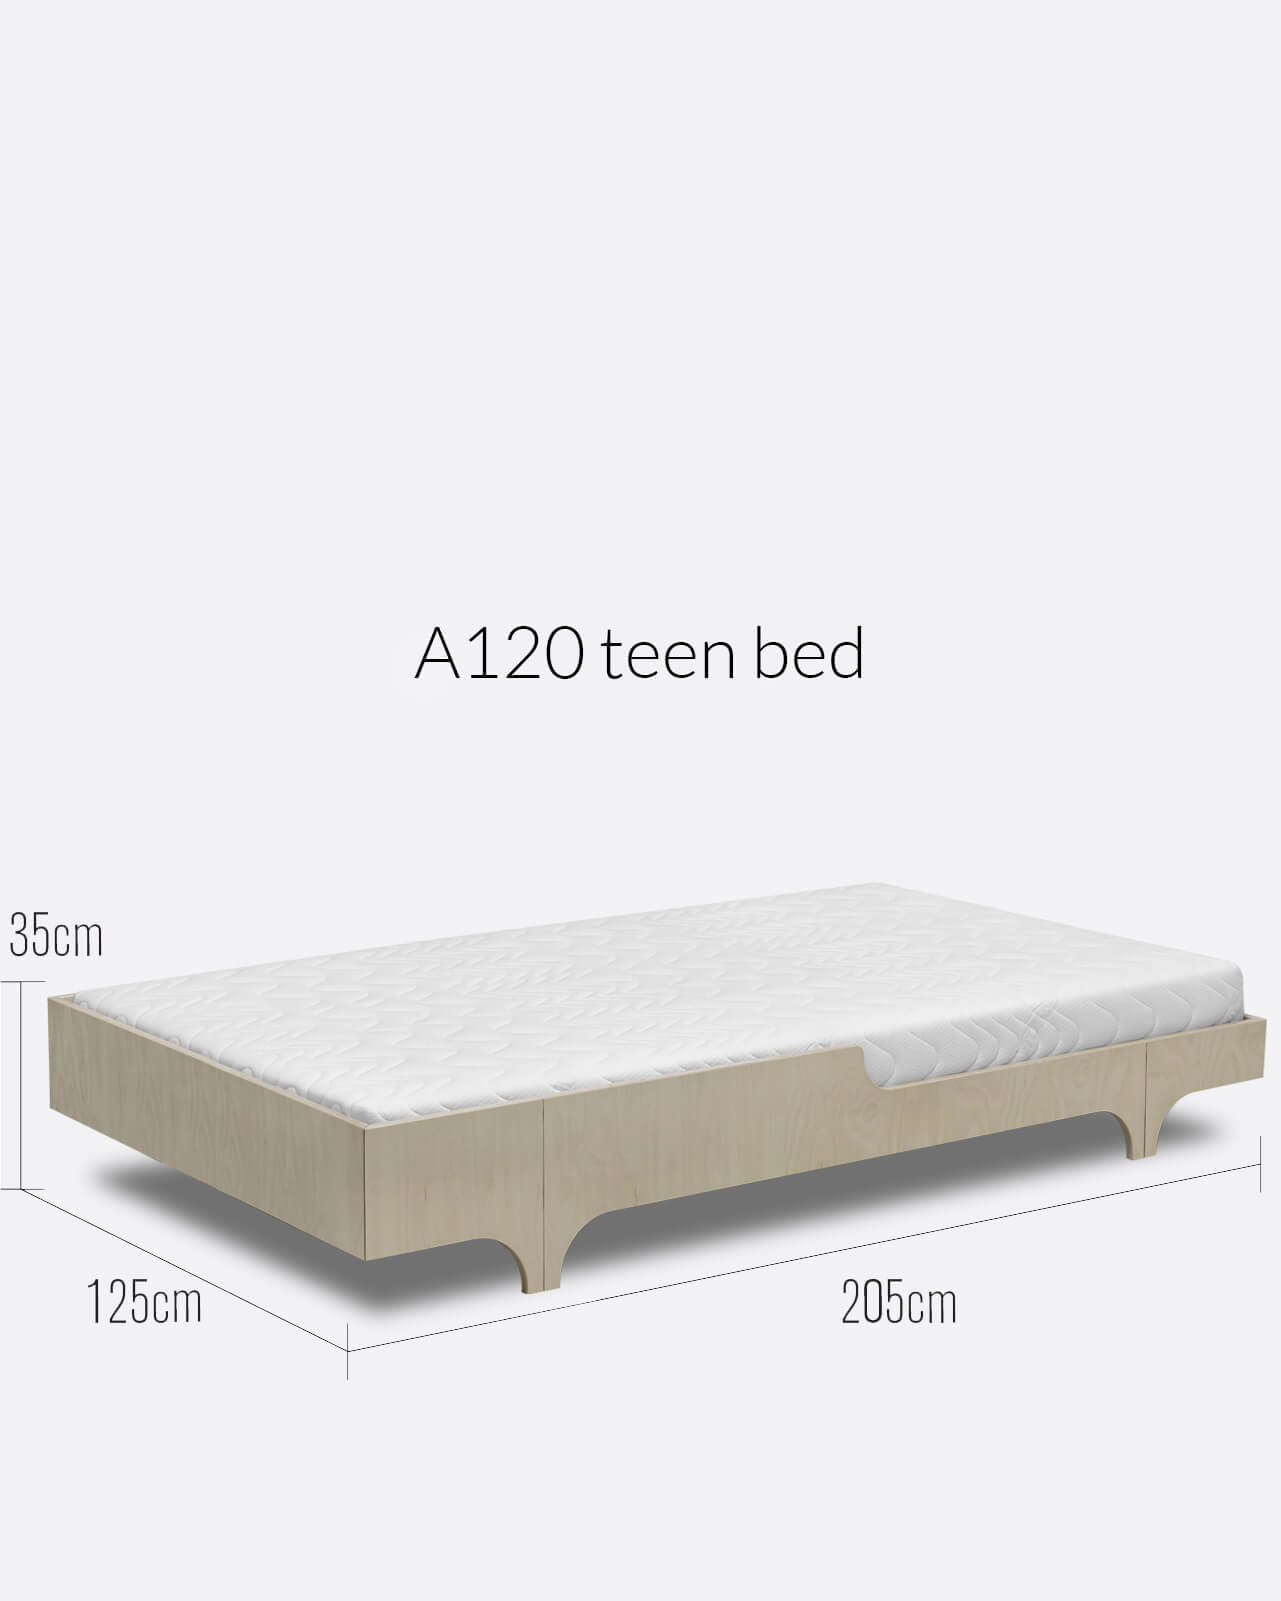 youth bed mattress size